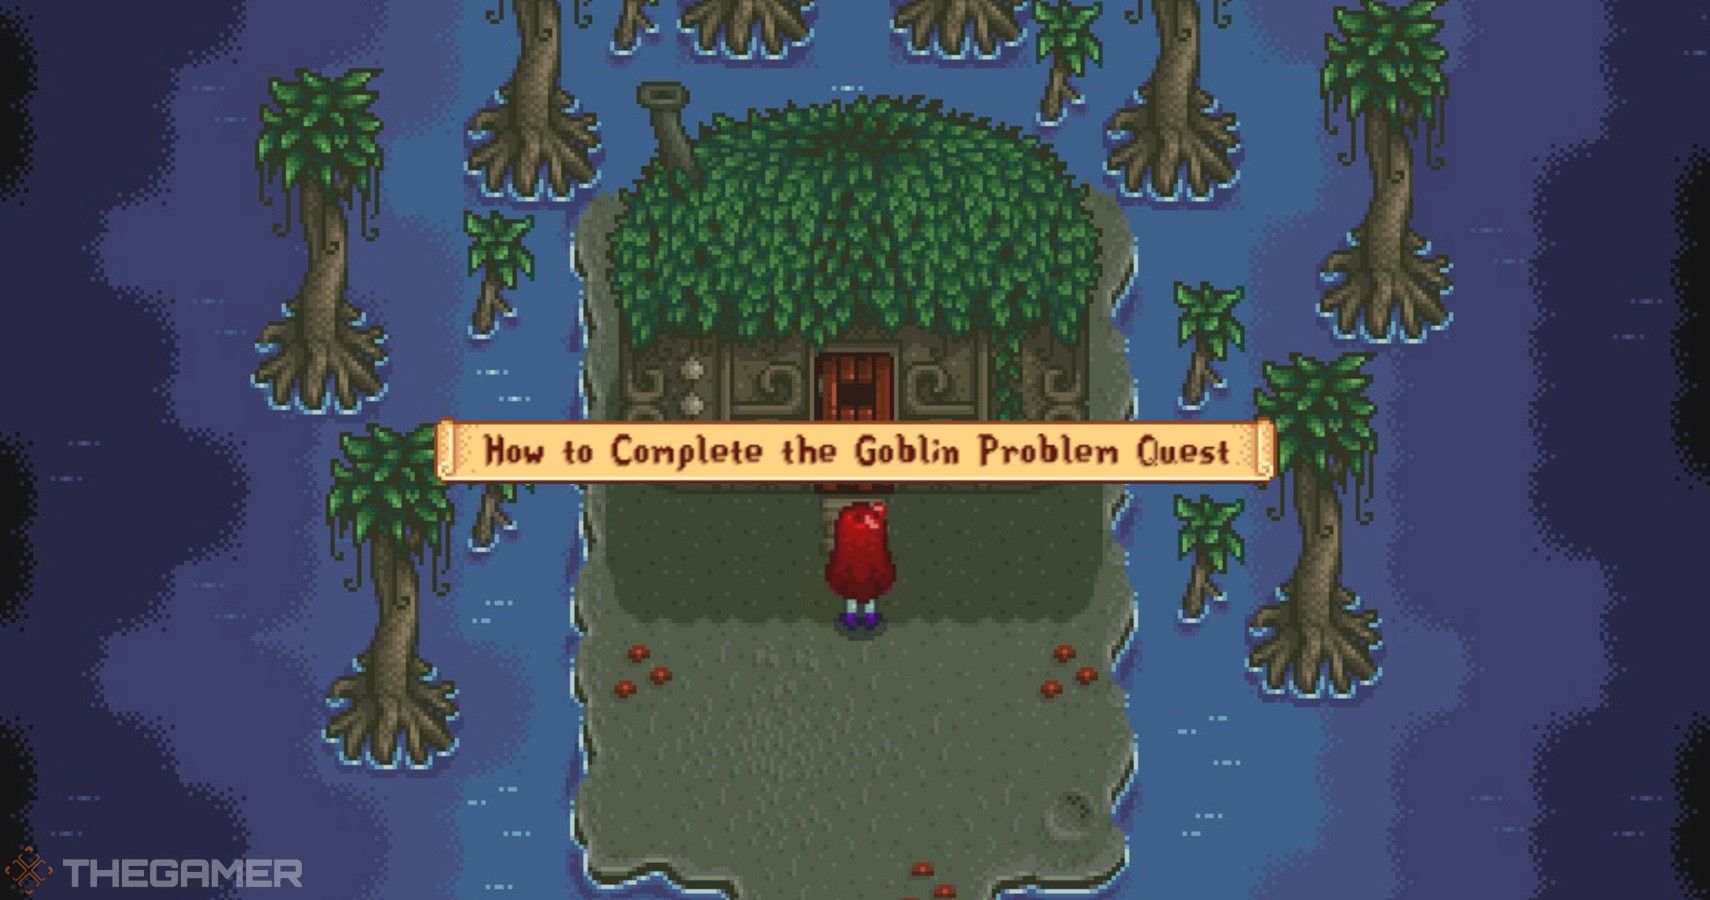 How To Get Past The Goblin Stardew Valley - GAMERSTOAST